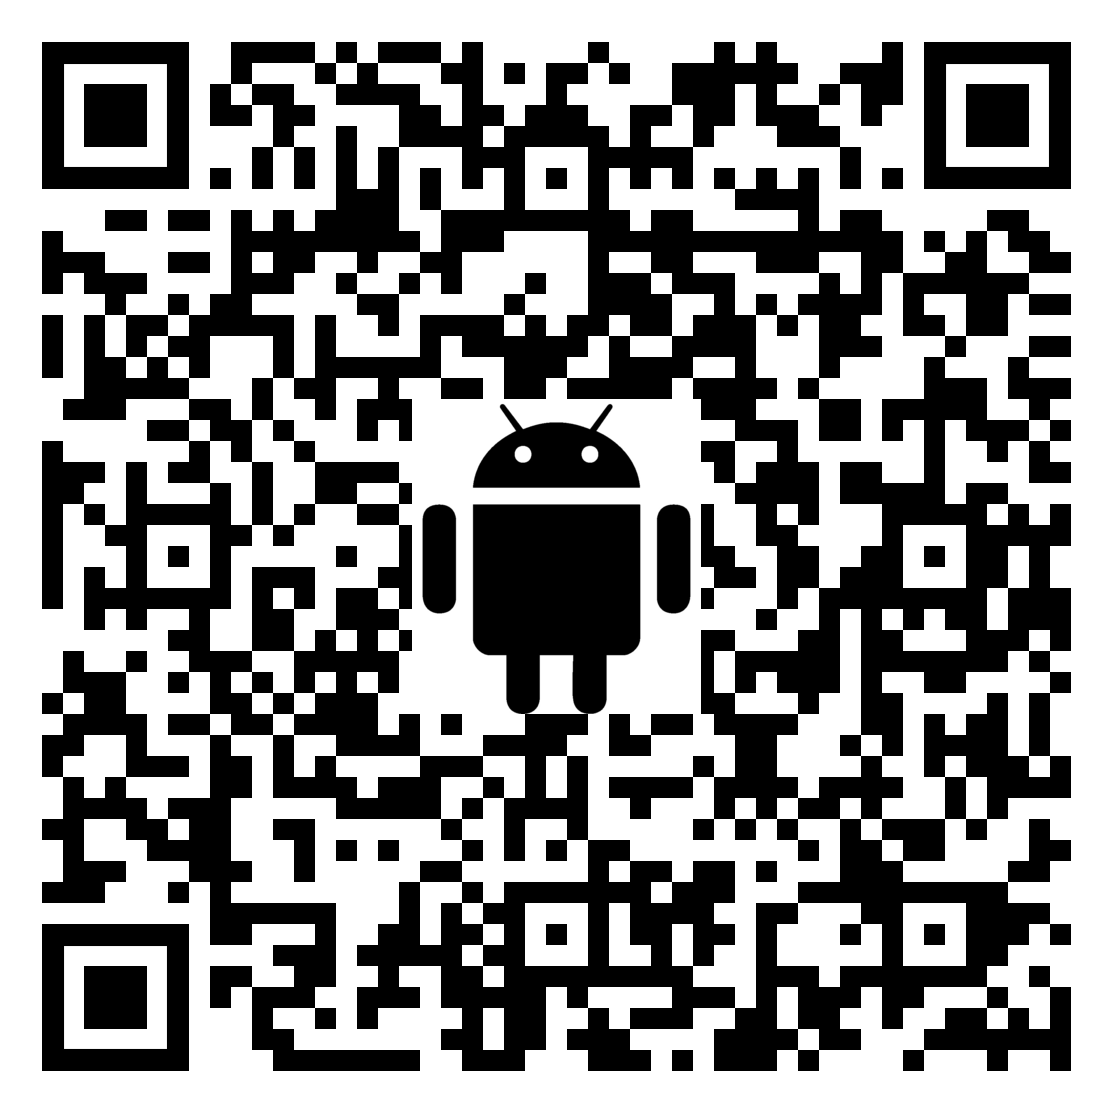 QR code for SKYE View 3 app on Google Play